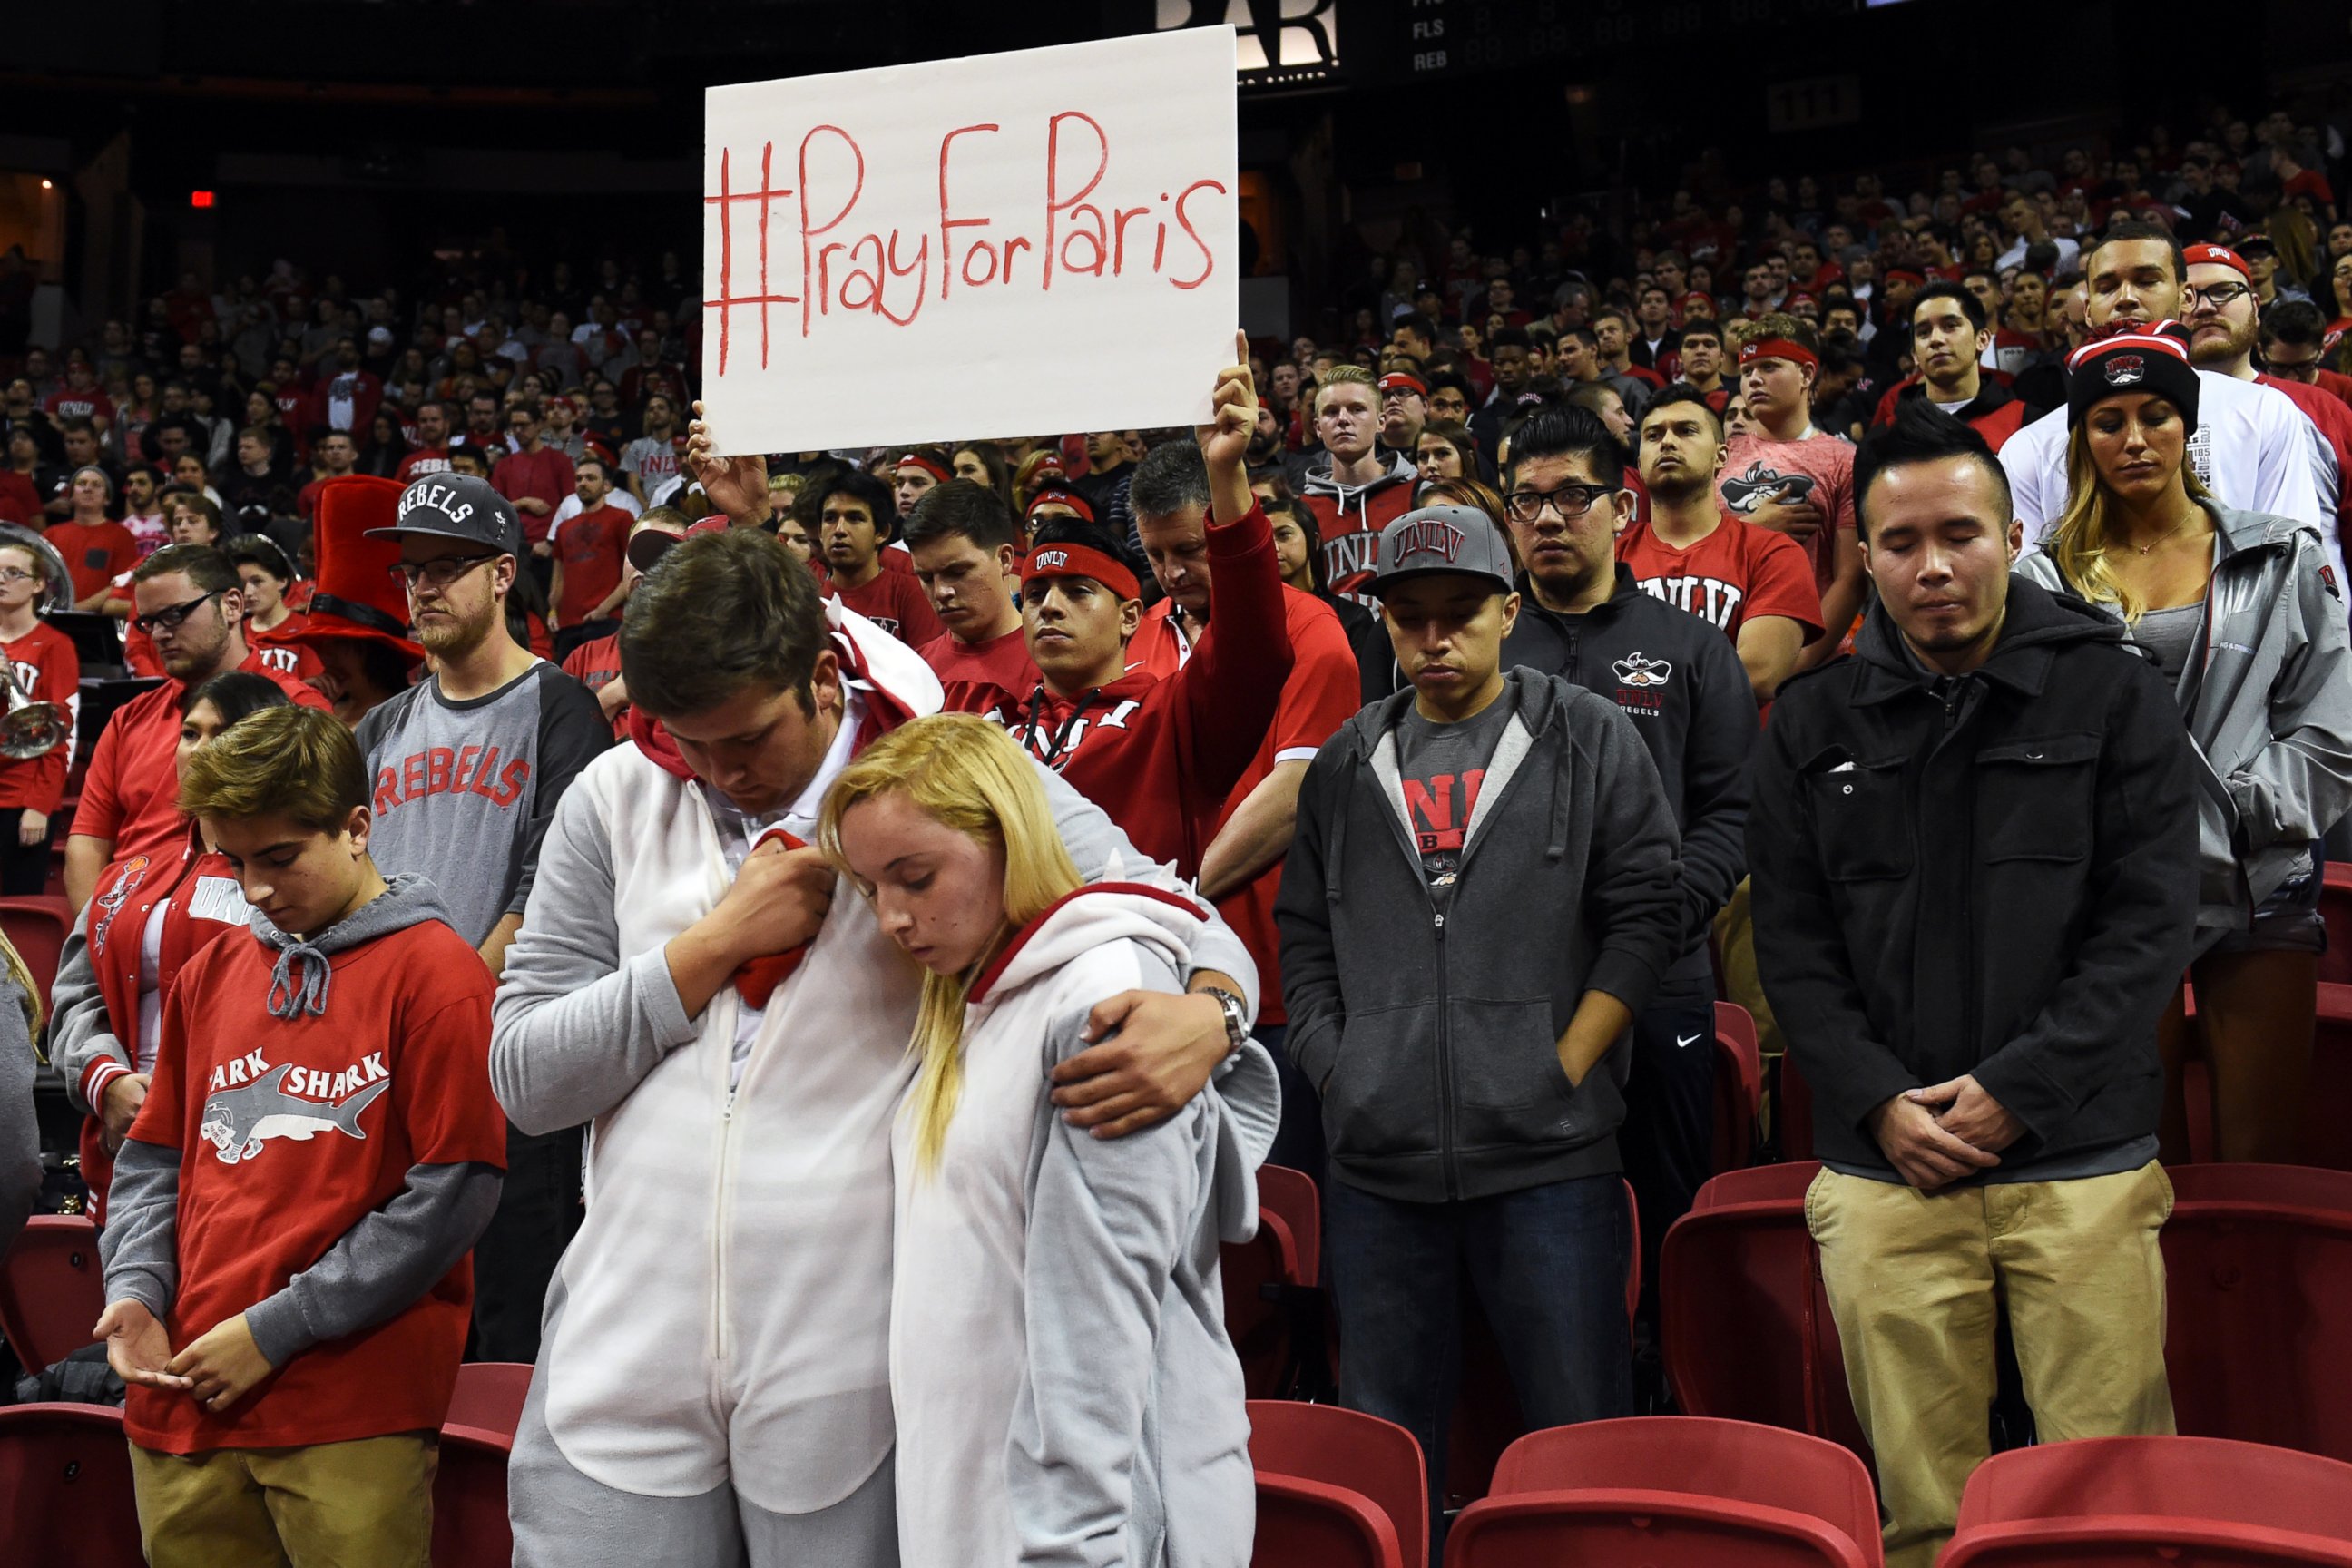 PHOTO: UNLV fans observe a moment of silence for the victims of the terrorist attacks in Paris on Nov. 13, 2015, before UNLV's basketball game against Cal Poly at the Thomas & Mack Center in Las Vegas.